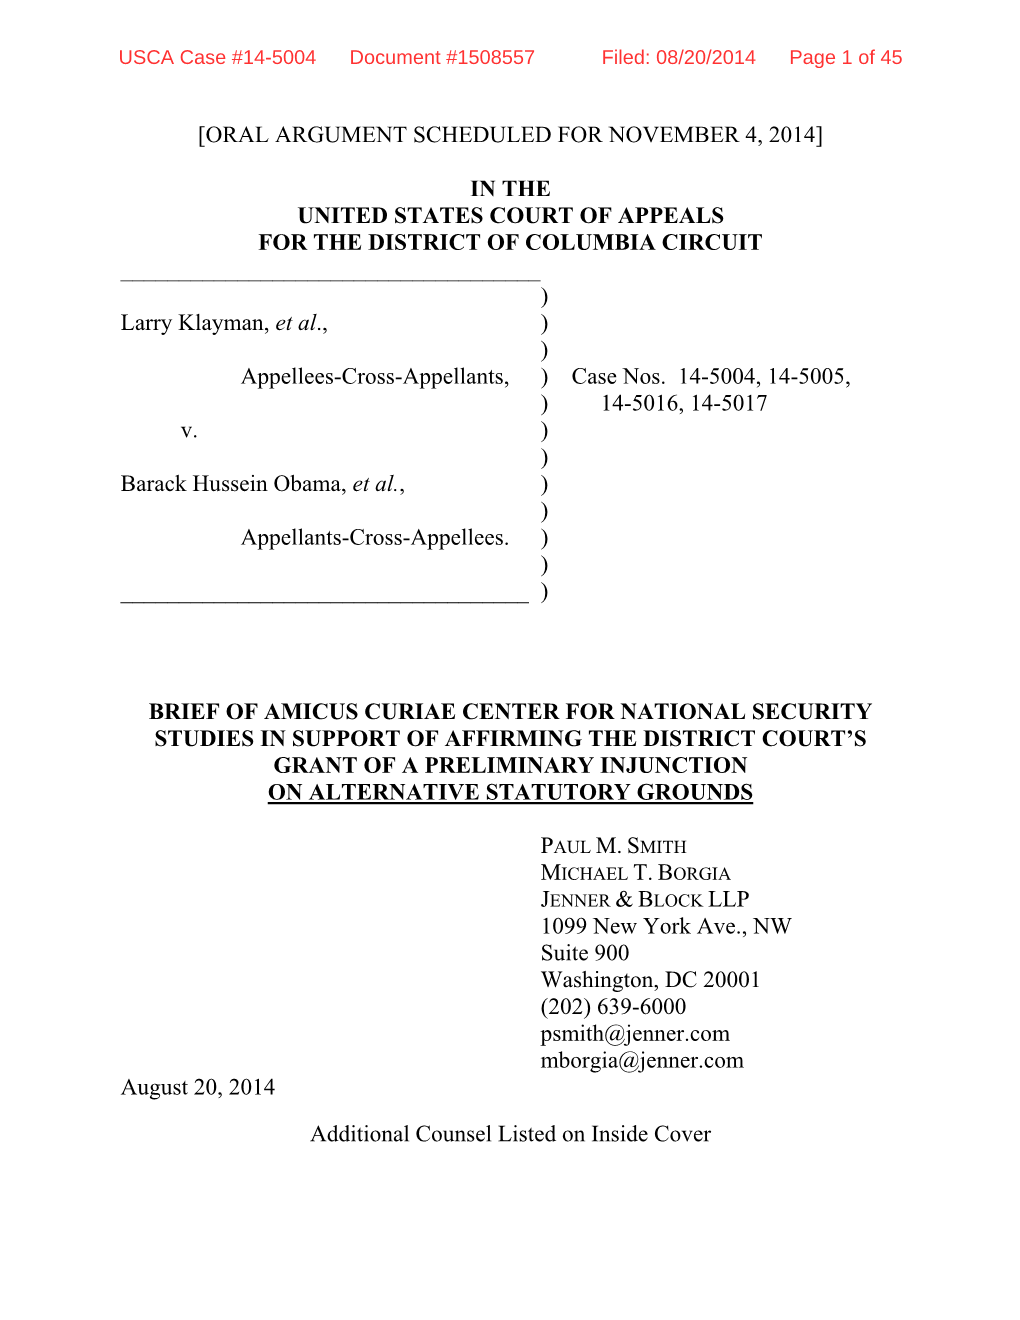 USCA Case #14-5004 Document #1508557 Filed: 08/20/2014 Page 1 of 45